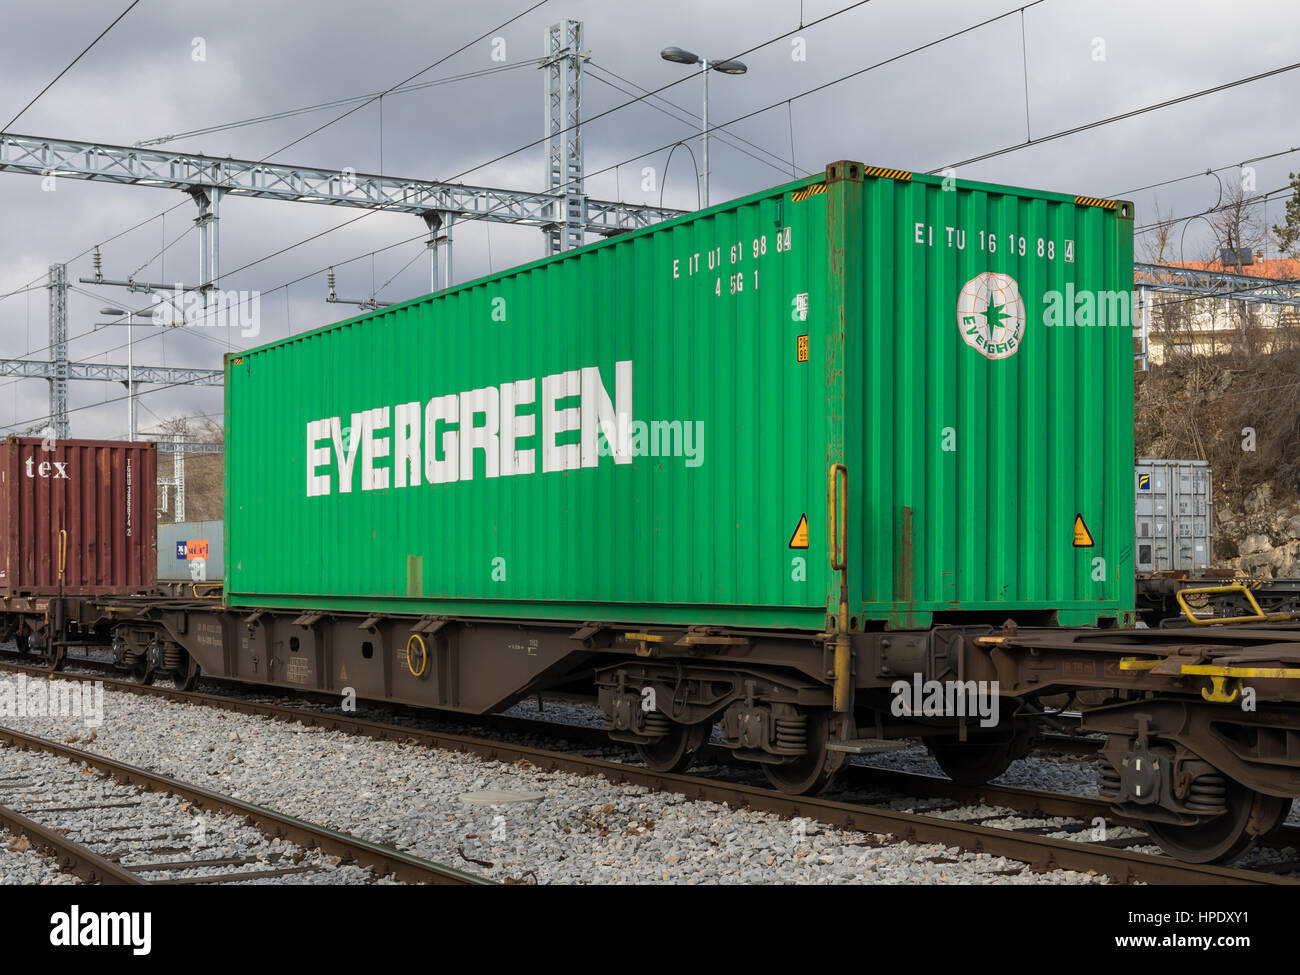 Freight train on railroad loaded with Evergreen cargo container Stock Photo